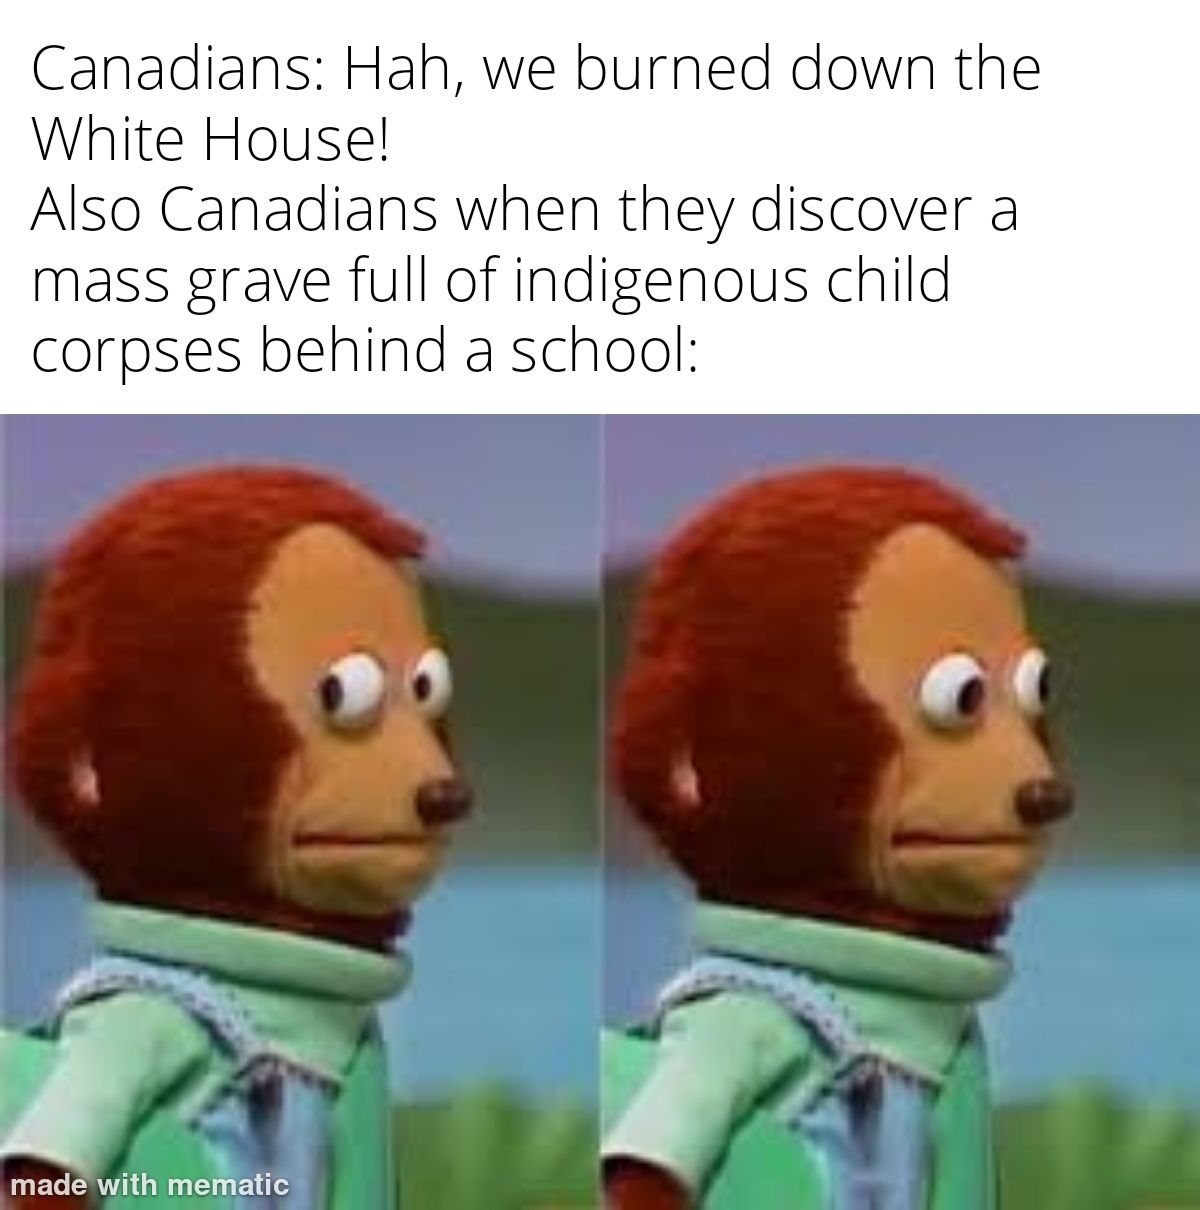 figured canada could do with a check